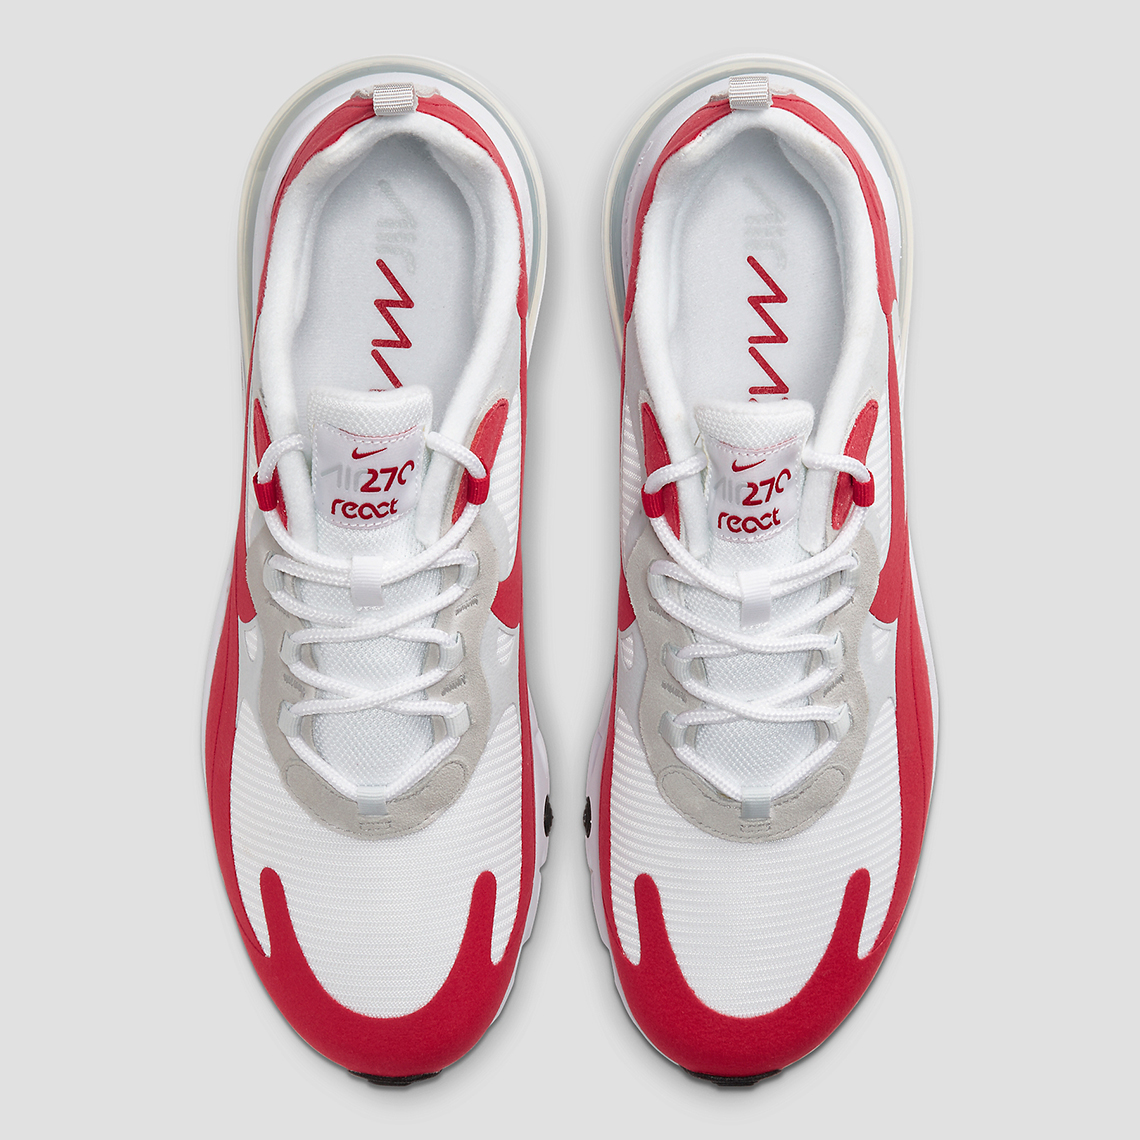 red and white 270 react